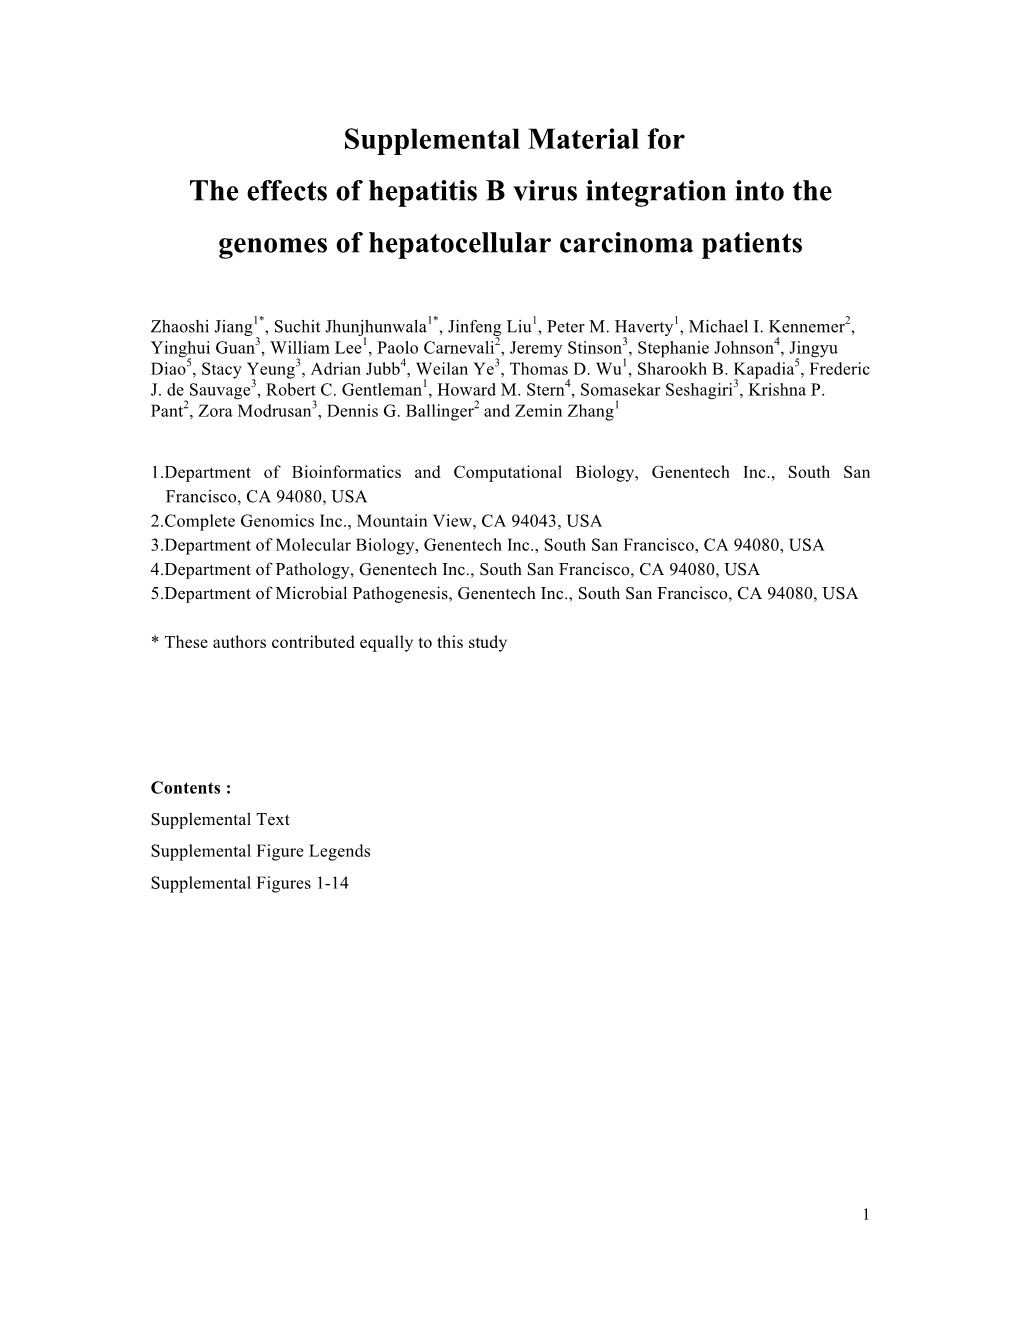 Supplemental Material for the Effects of Hepatitis B Virus Integration Into the Genomes of Hepatocellular Carcinoma Patients